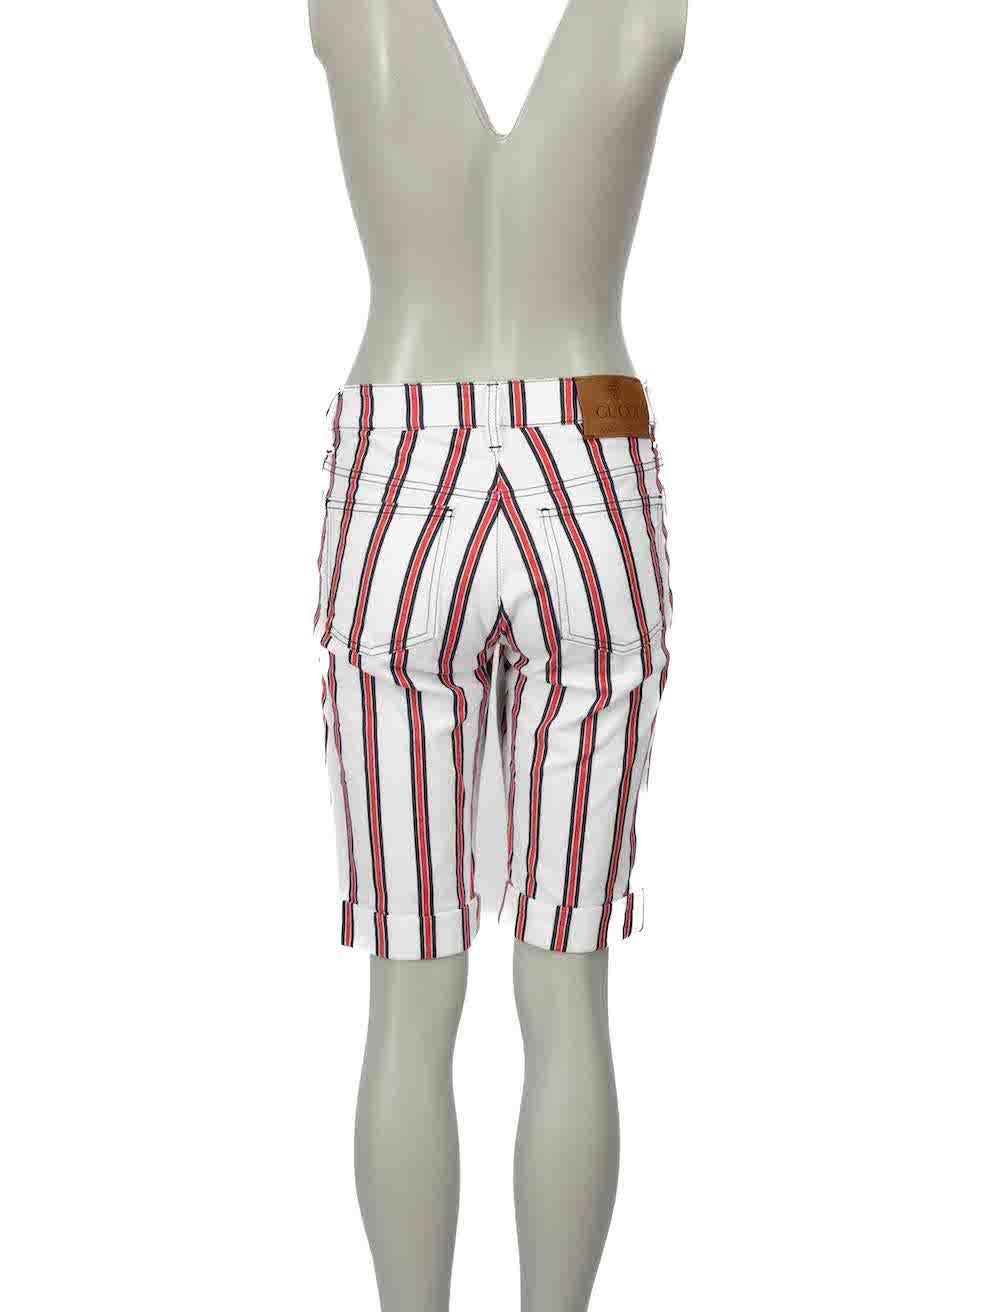 Gucci Striped Knee Length Shorts Size L In Good Condition For Sale In London, GB